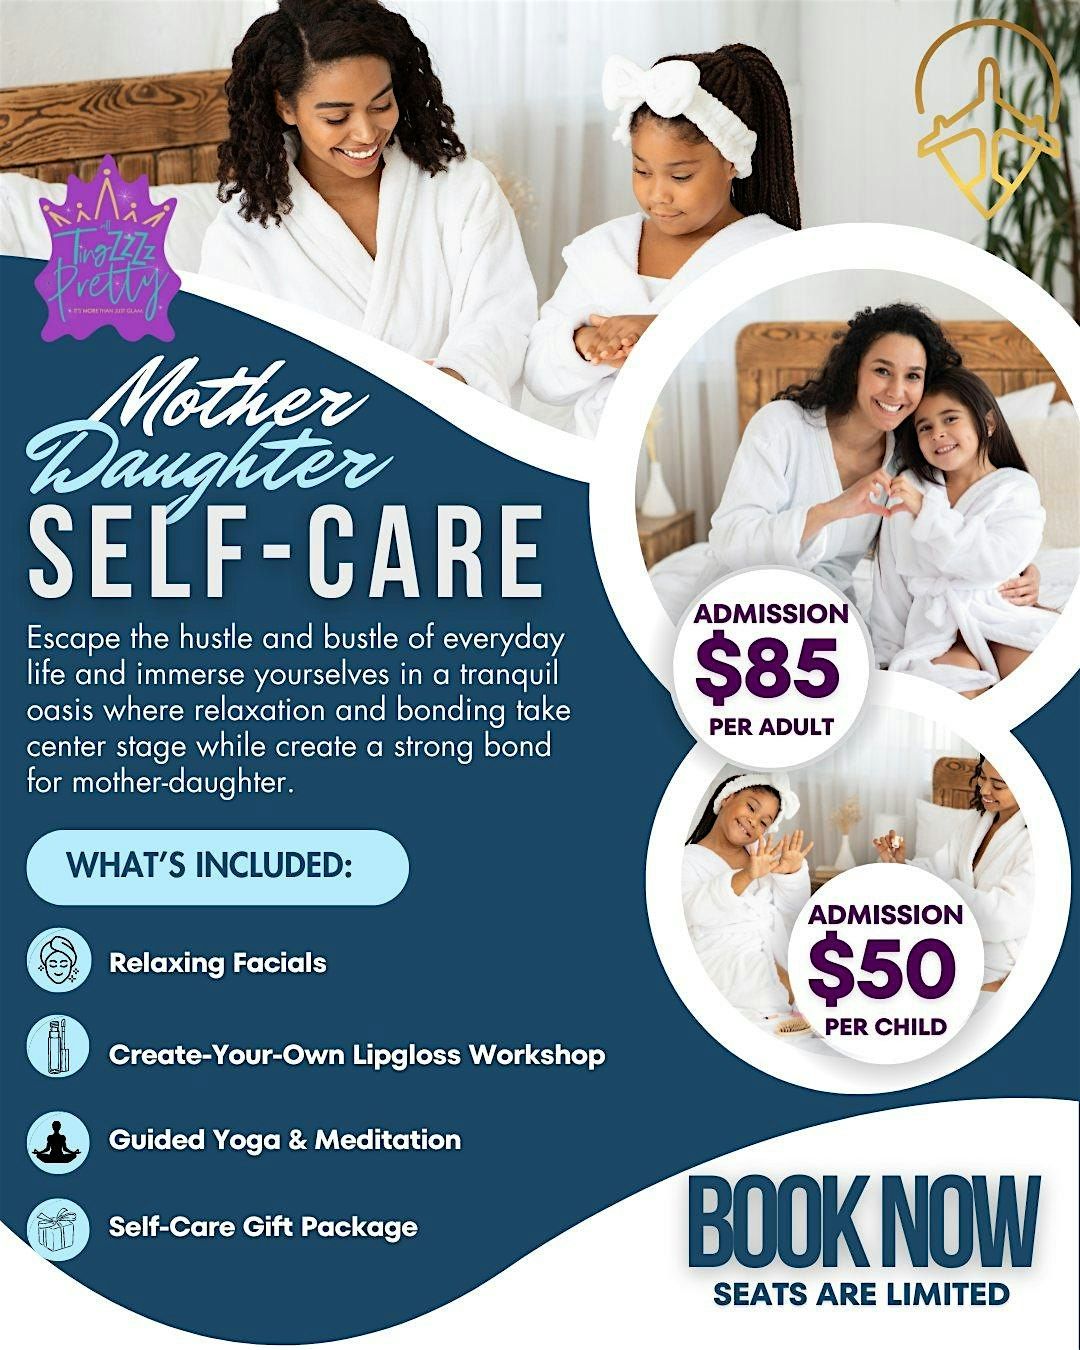 The Mother-Daughter Self Care Experience